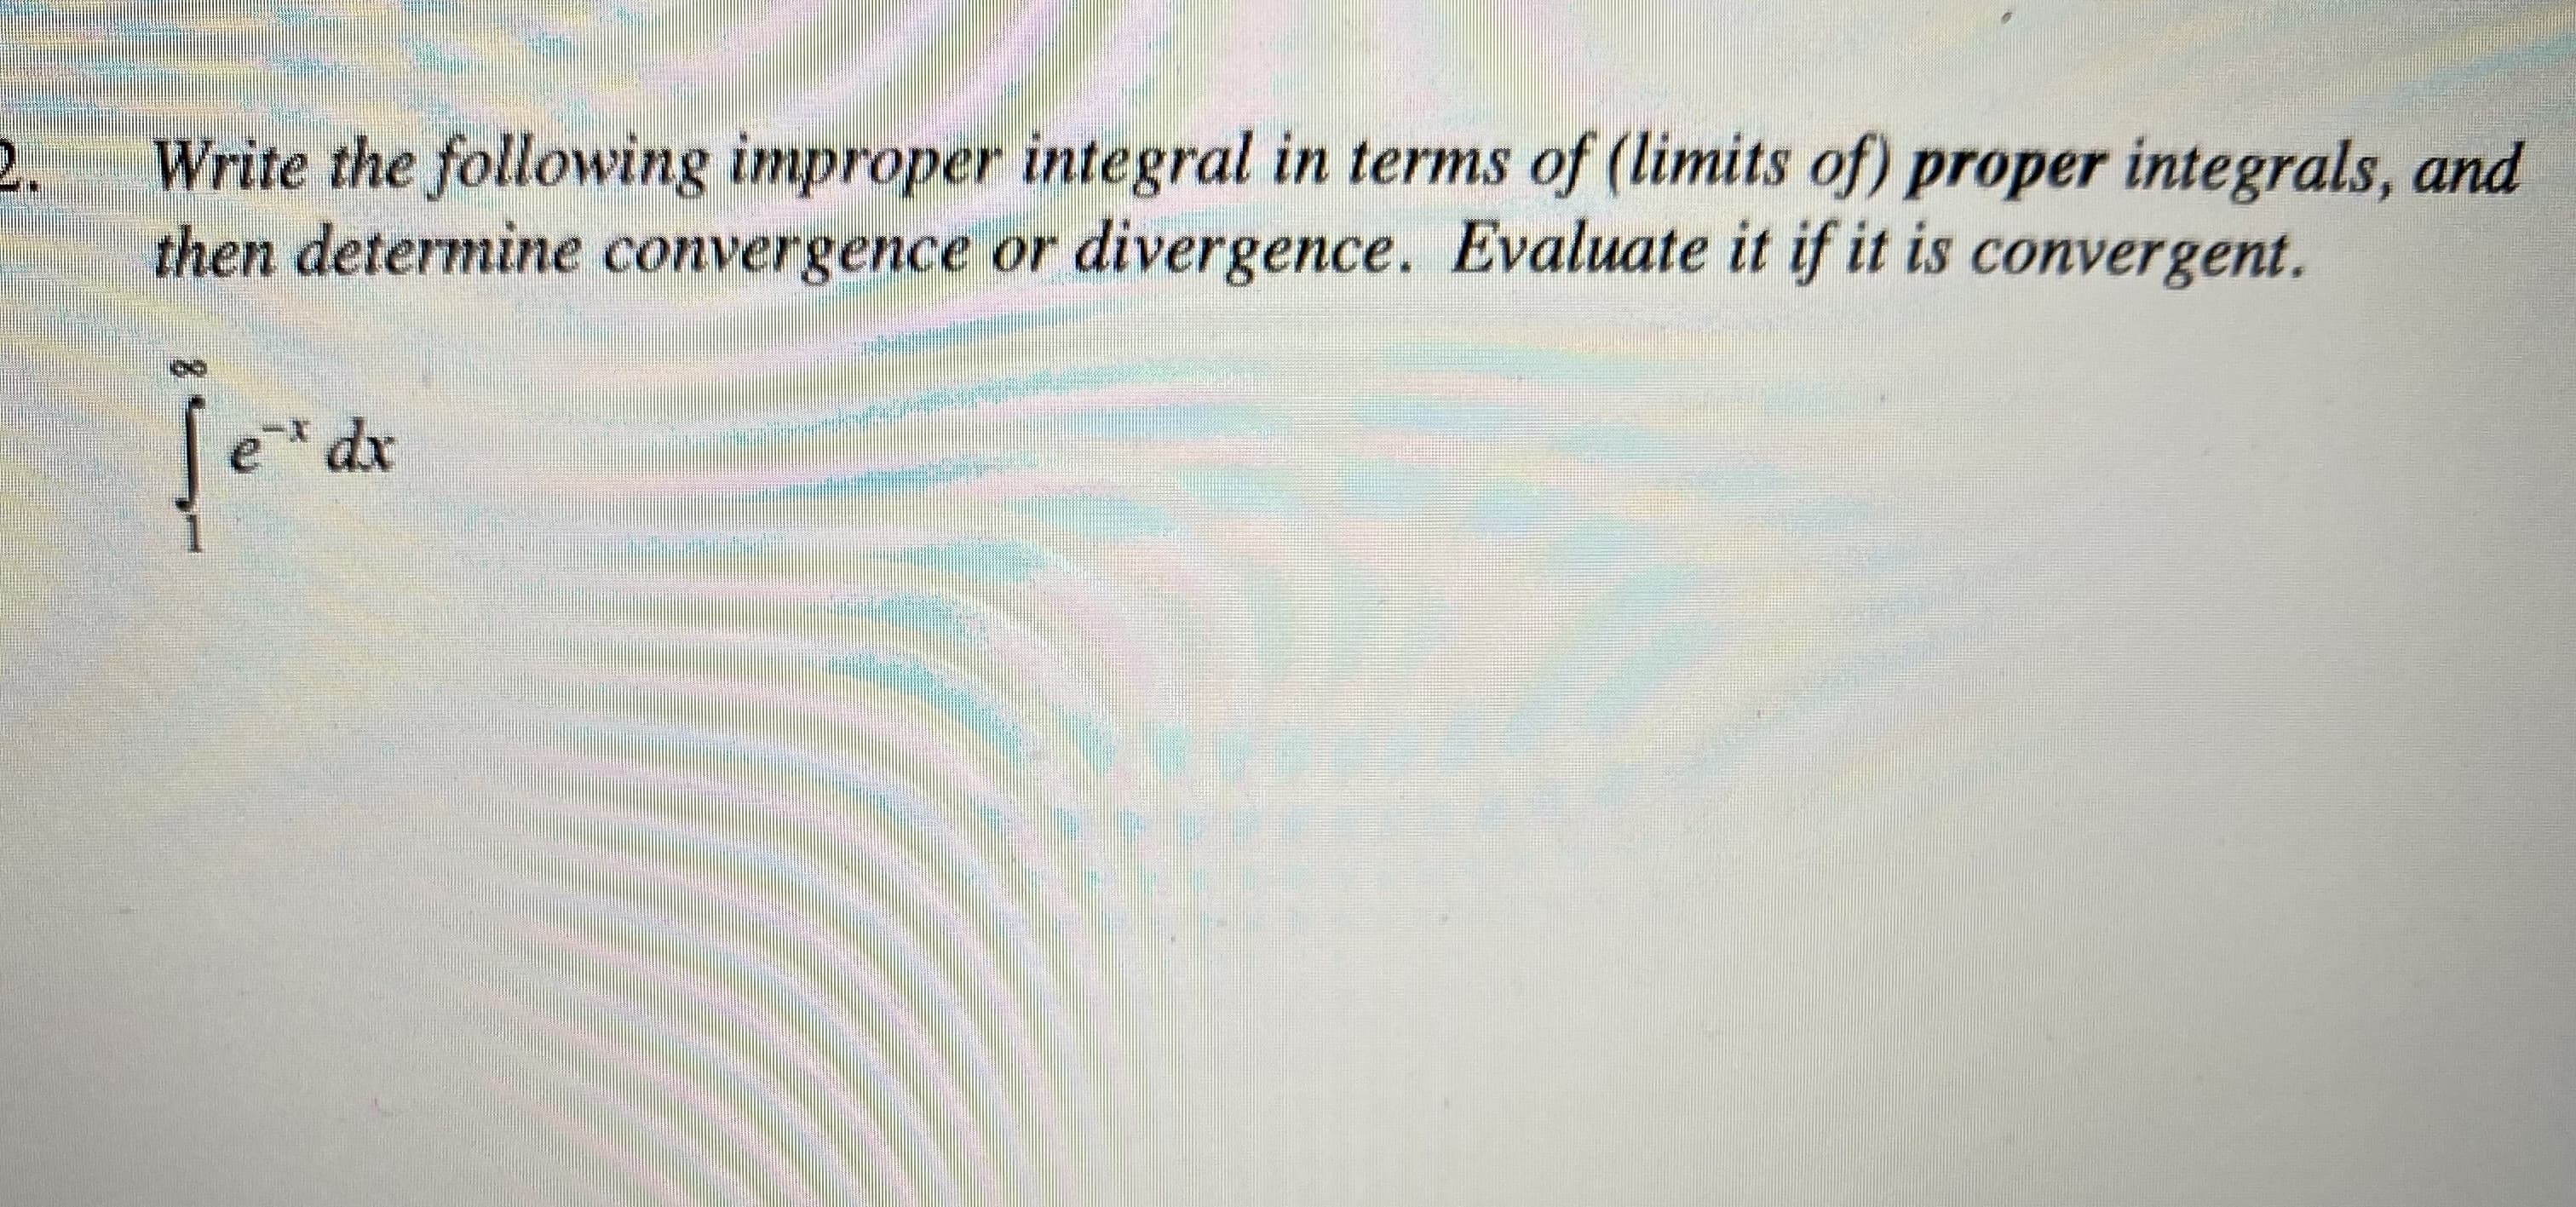 Write the following improper integral in terms of (limits of) proper integrals, and
then determine convergence or divergence. Evaluate it if it is convergent.
e*dx
